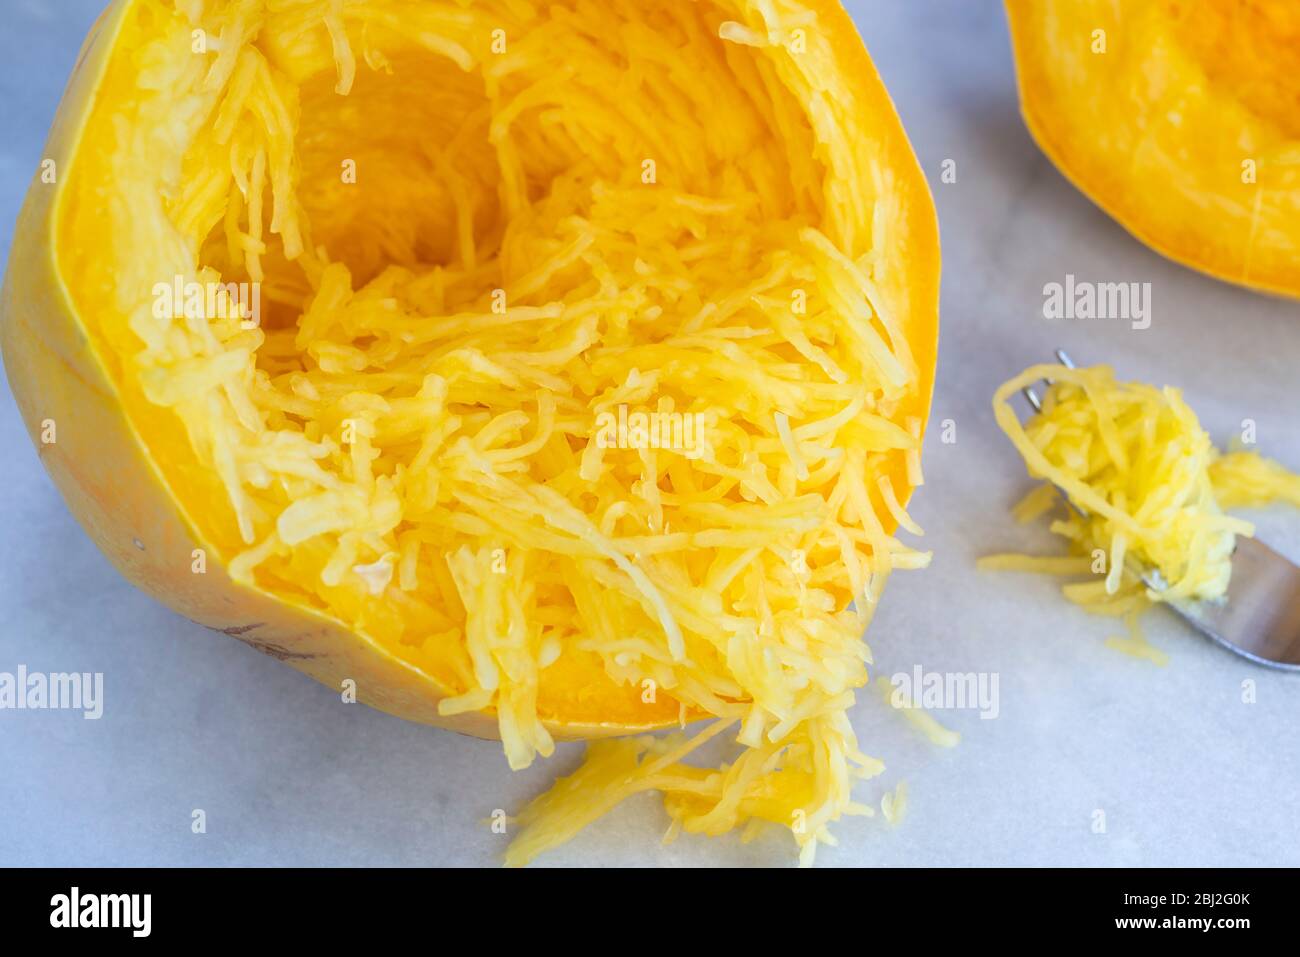 A cooked, halved spaghetti squash, separated into strands with a fork. Stock Photo